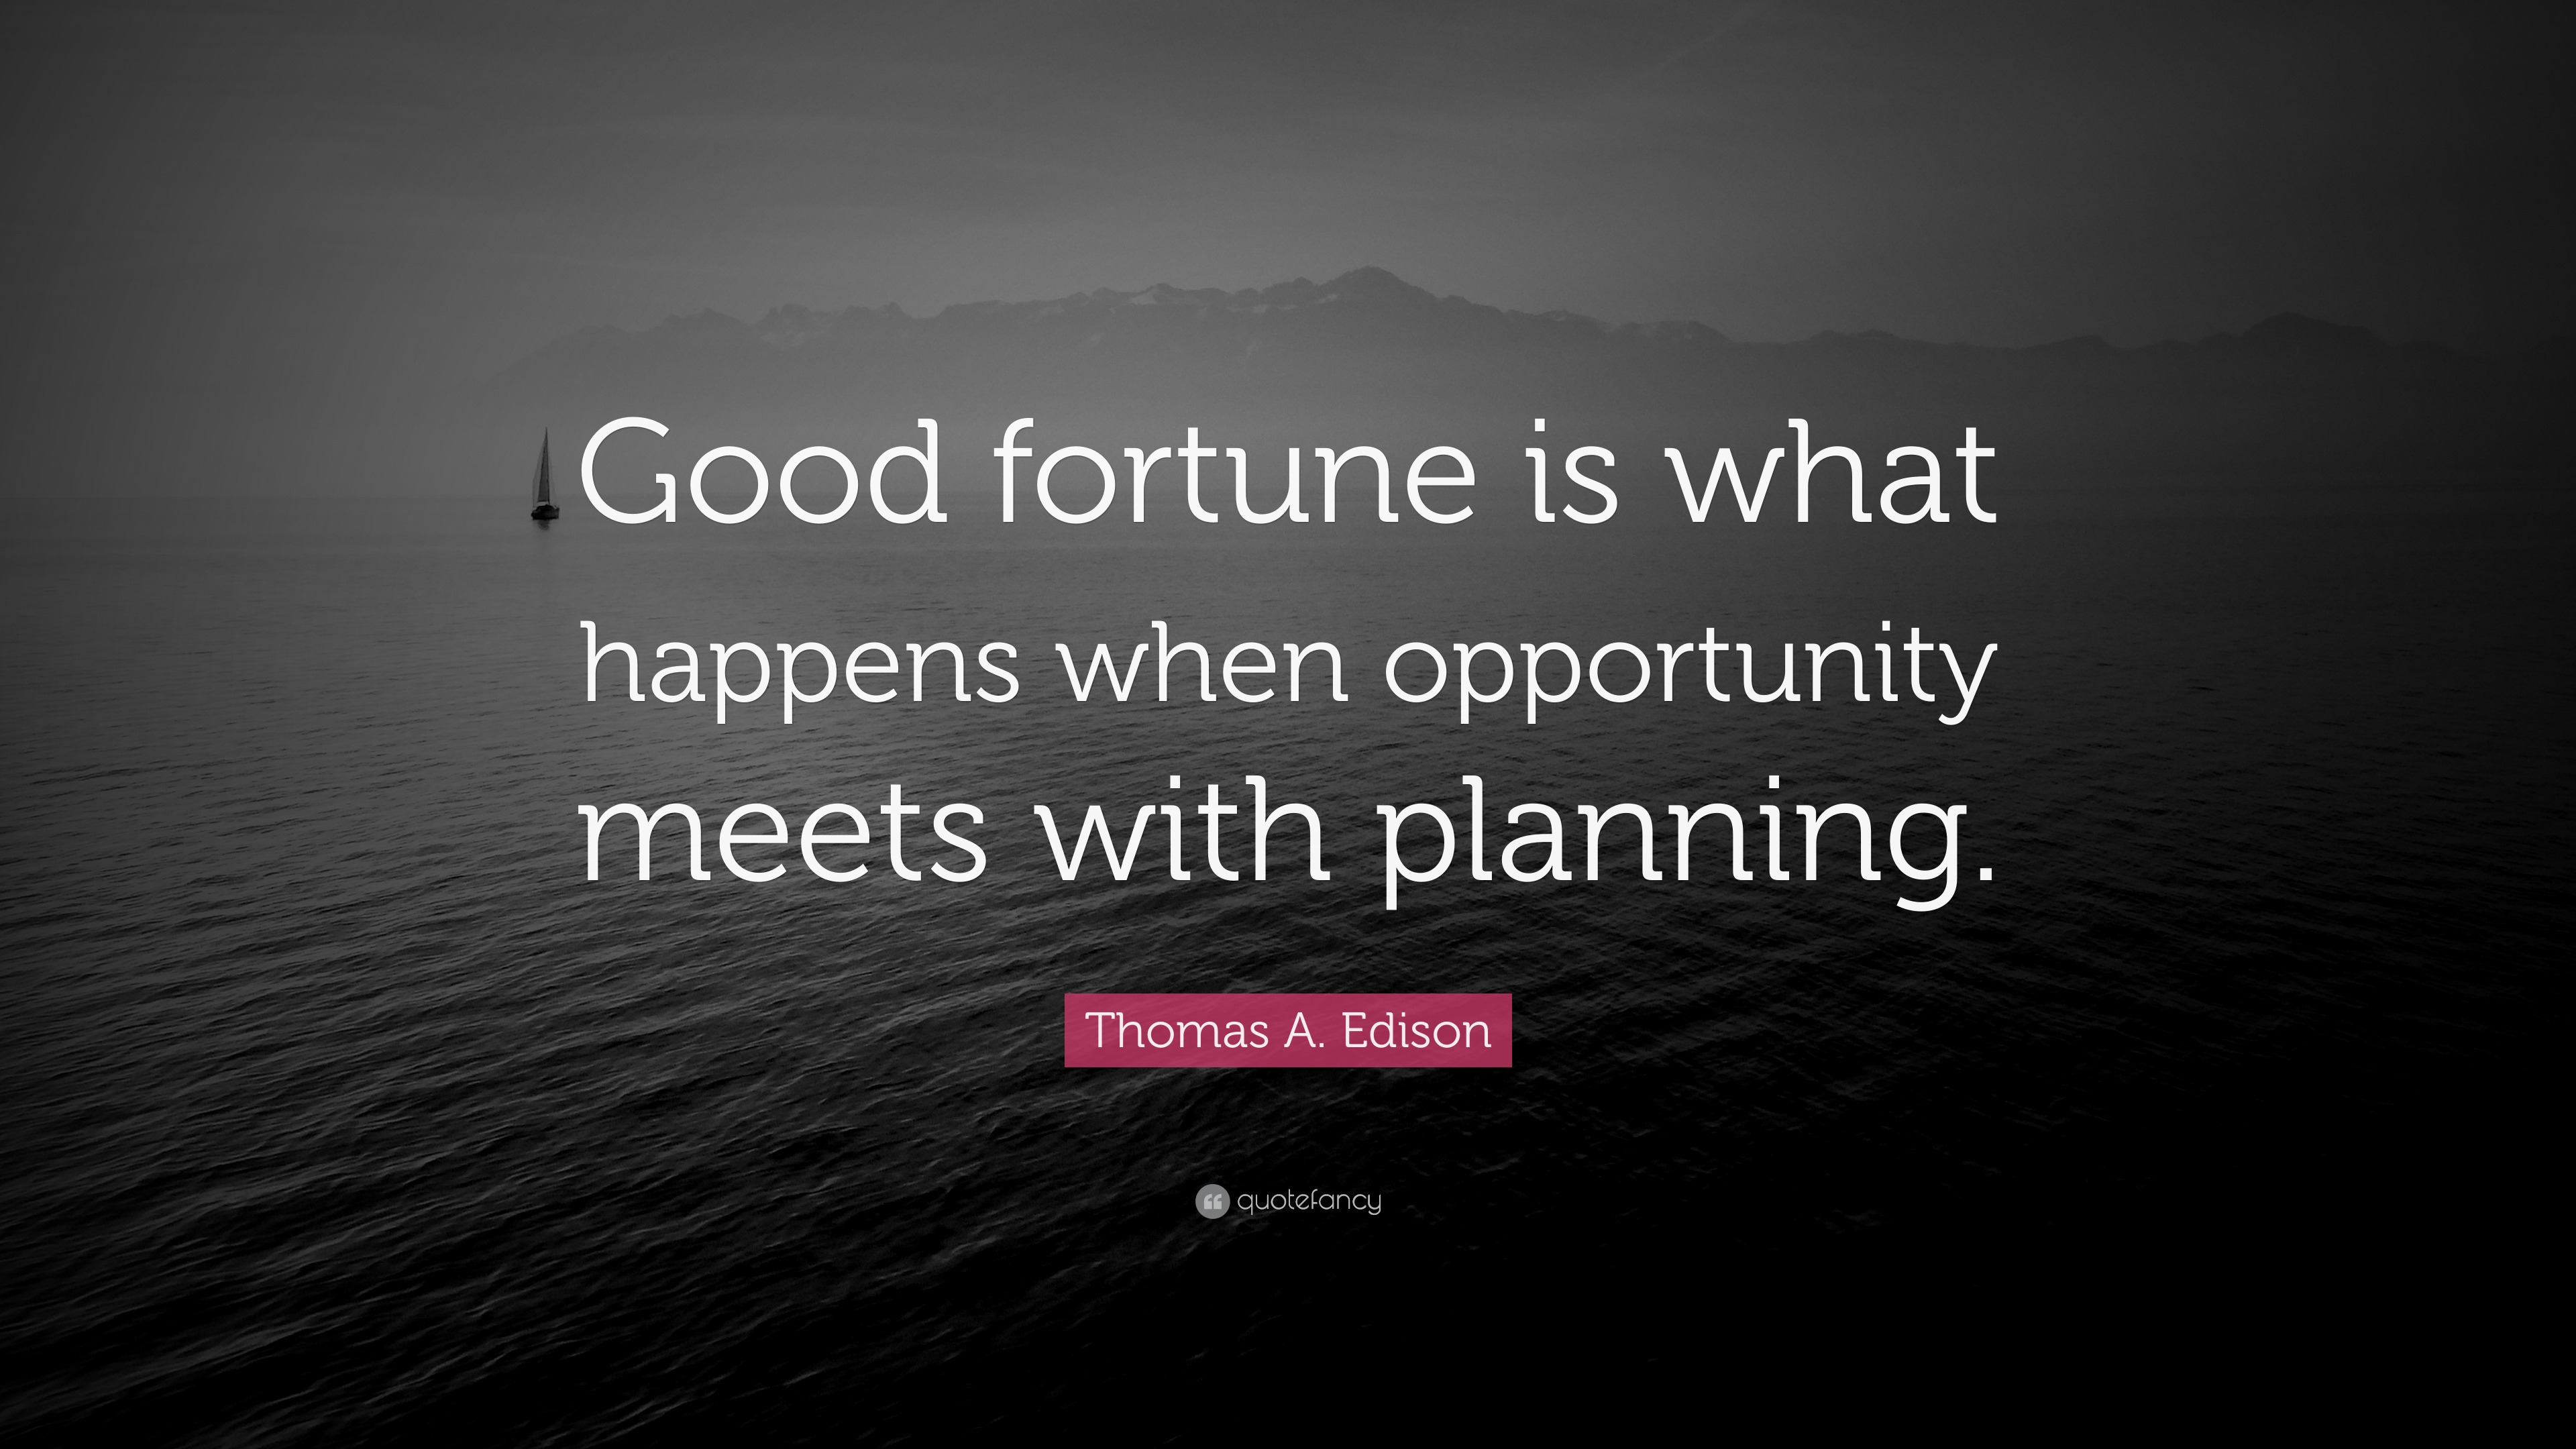 Thomas A. Edison Quote: “Good fortune is what happens when opportunity